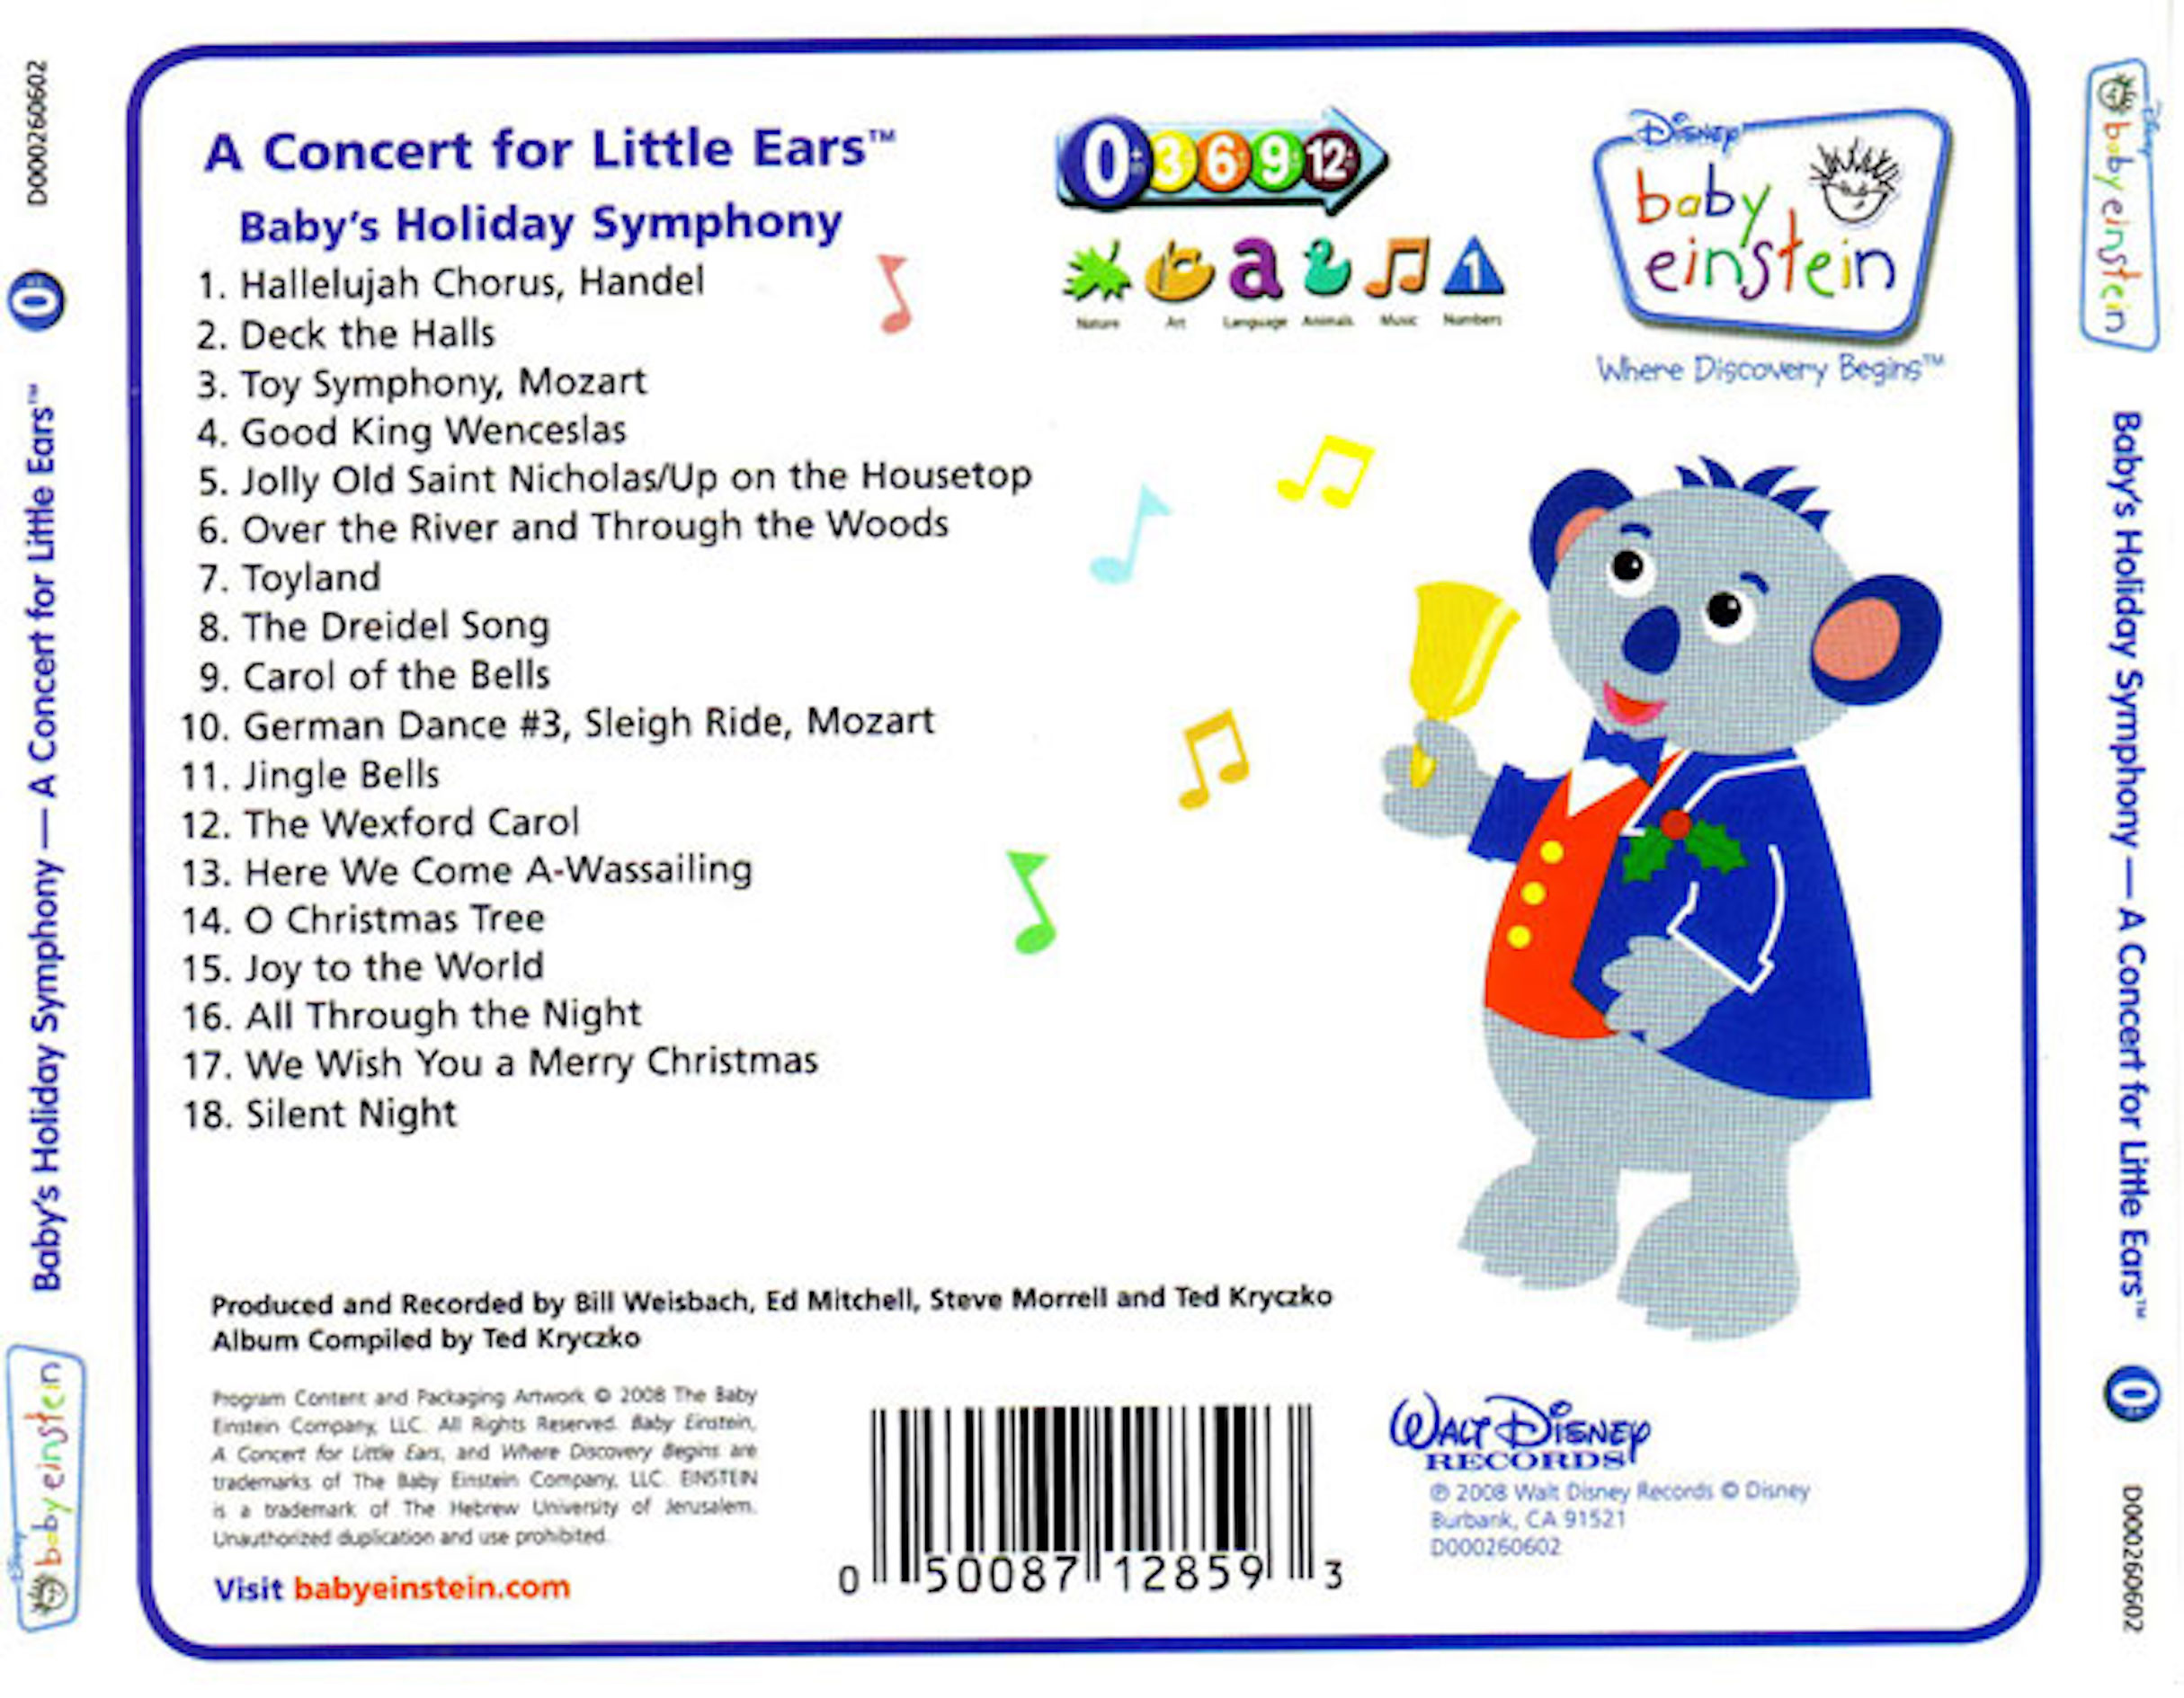 Covers Box Sk Disney Baby Einstein Baby S Holiday Symphony 08 High Quality Dvd Blueray Movie